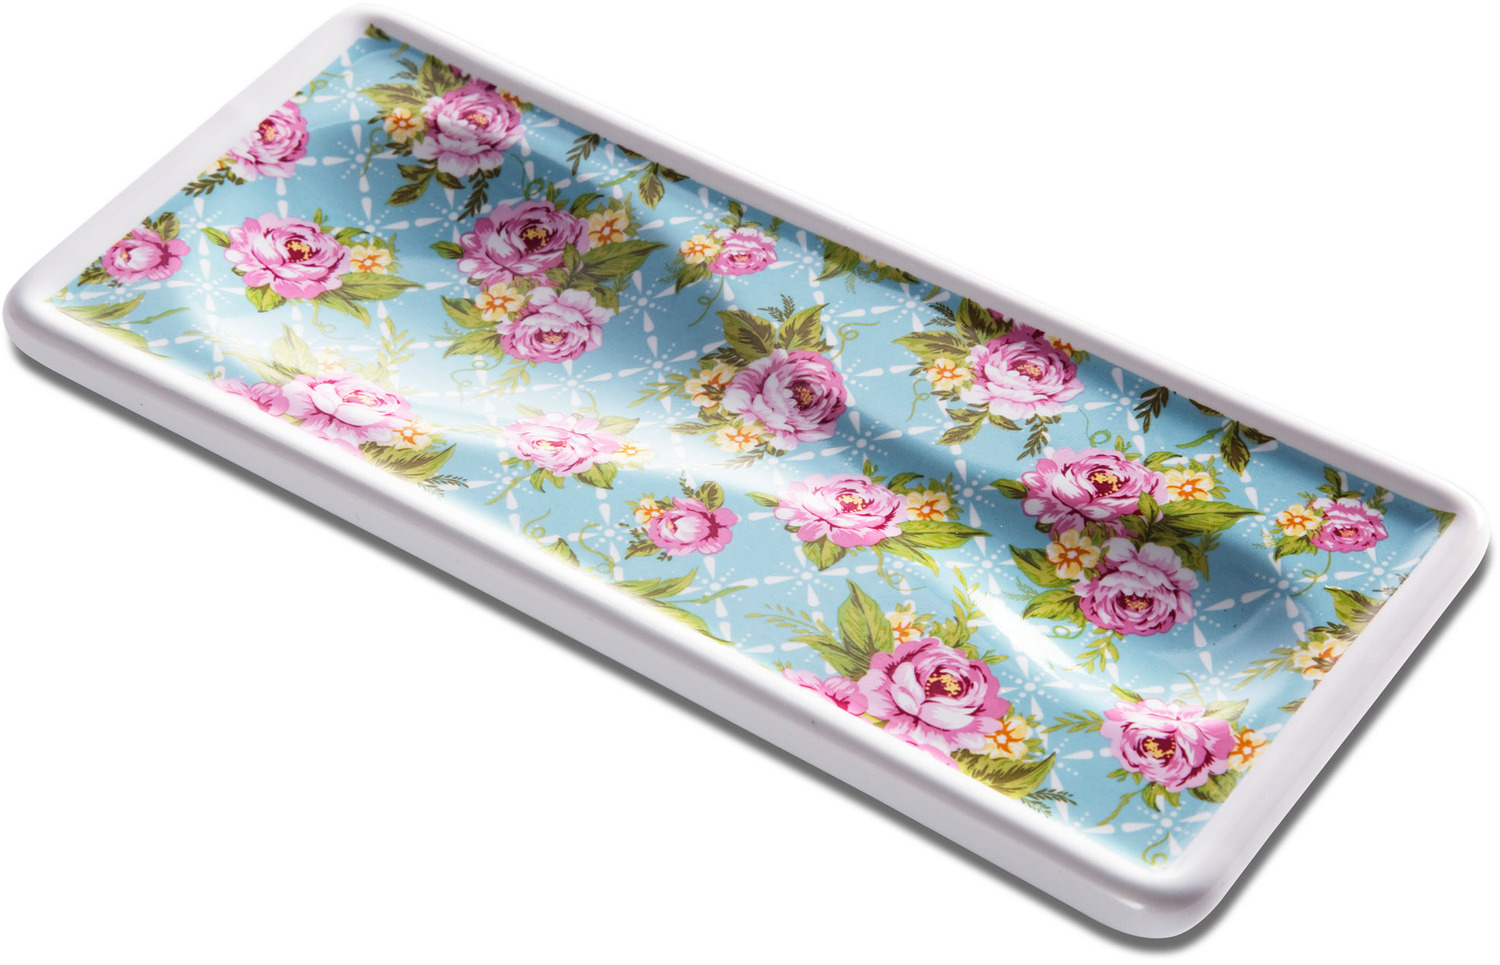 Cottage Kitchen Rose by You & Me by Jessie Steele - Cottage Kitchen Rose - 3.75" x 8.5" Spoon Rest